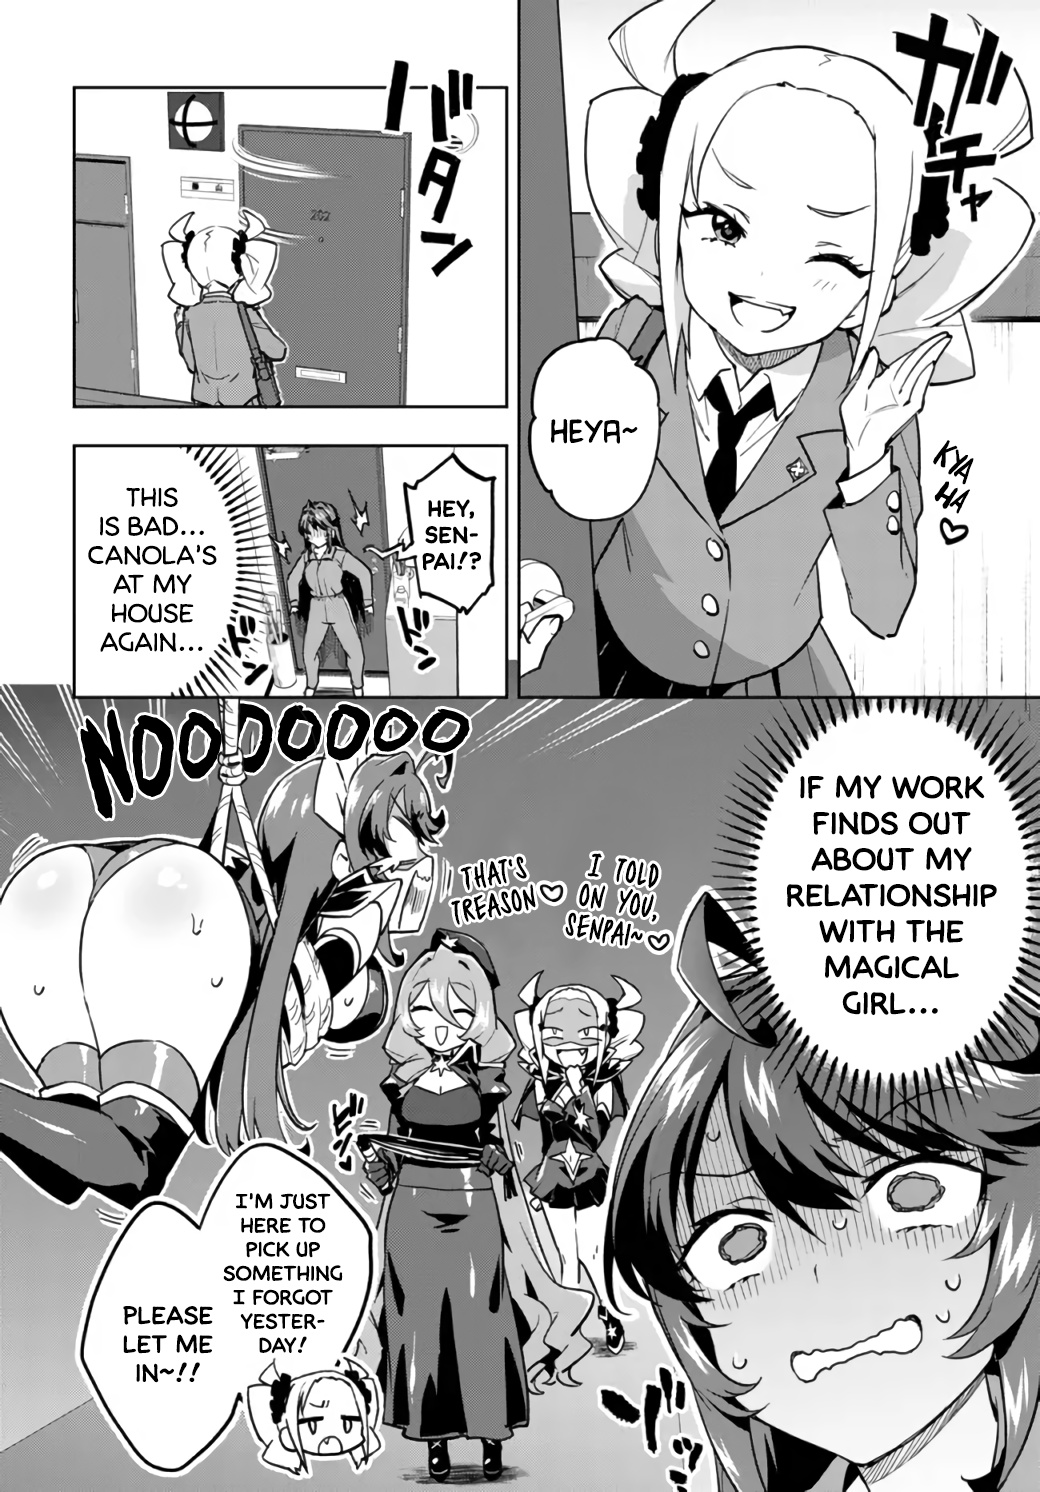 Magical Girl 201 - Page 2